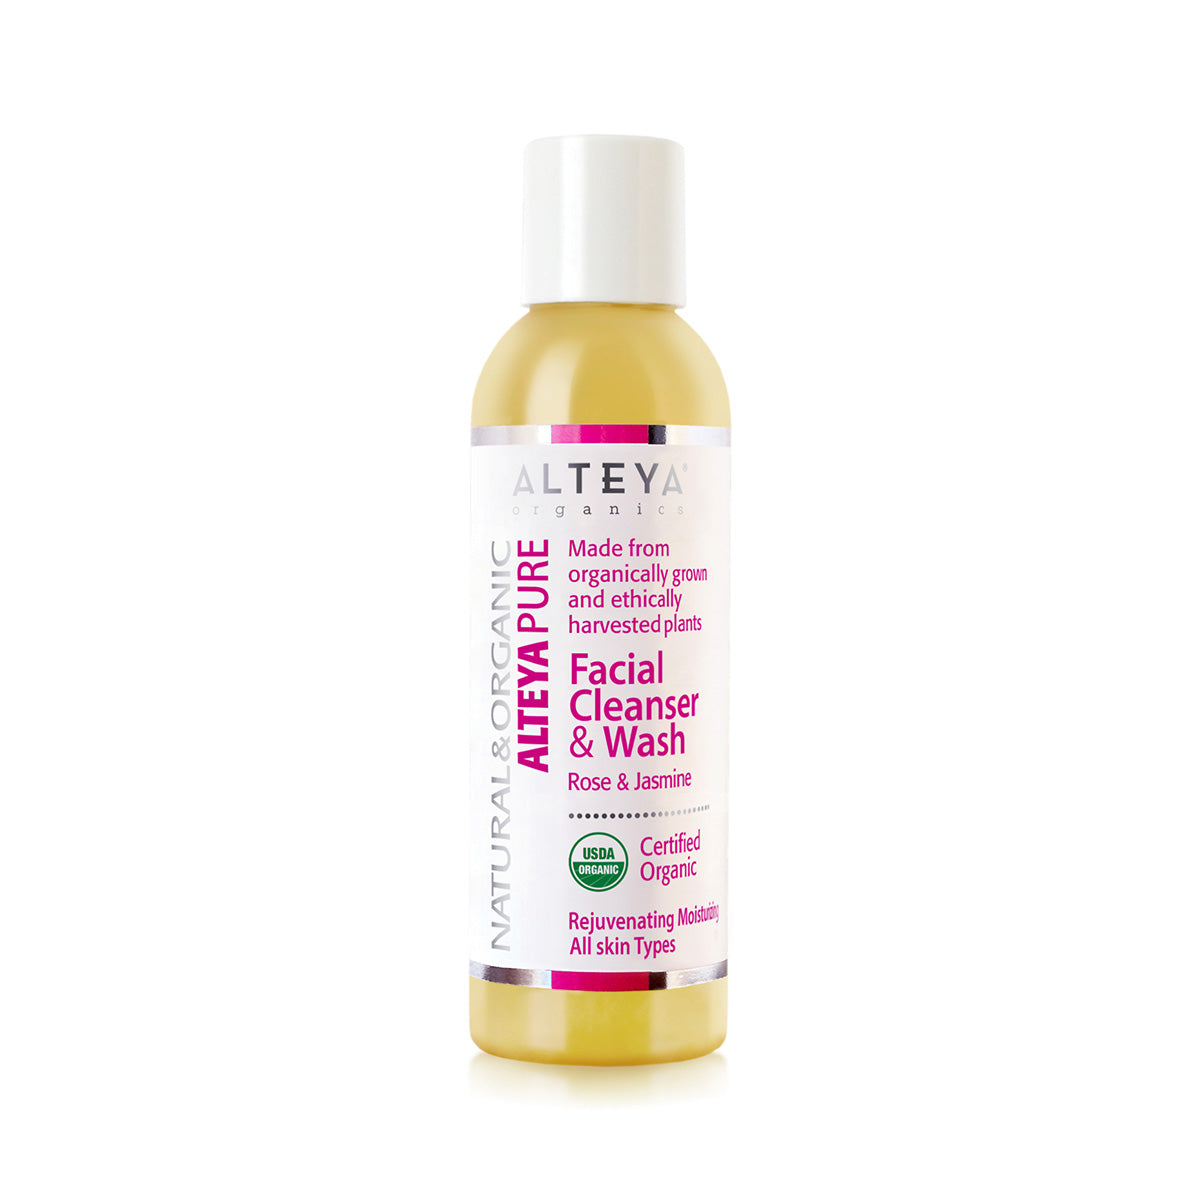 A gentle and organic bottle of Alteya Organics Facial Cleanser & Wash - Rose & Jasmine on a white background with the soothing scents of rose and jasmine.